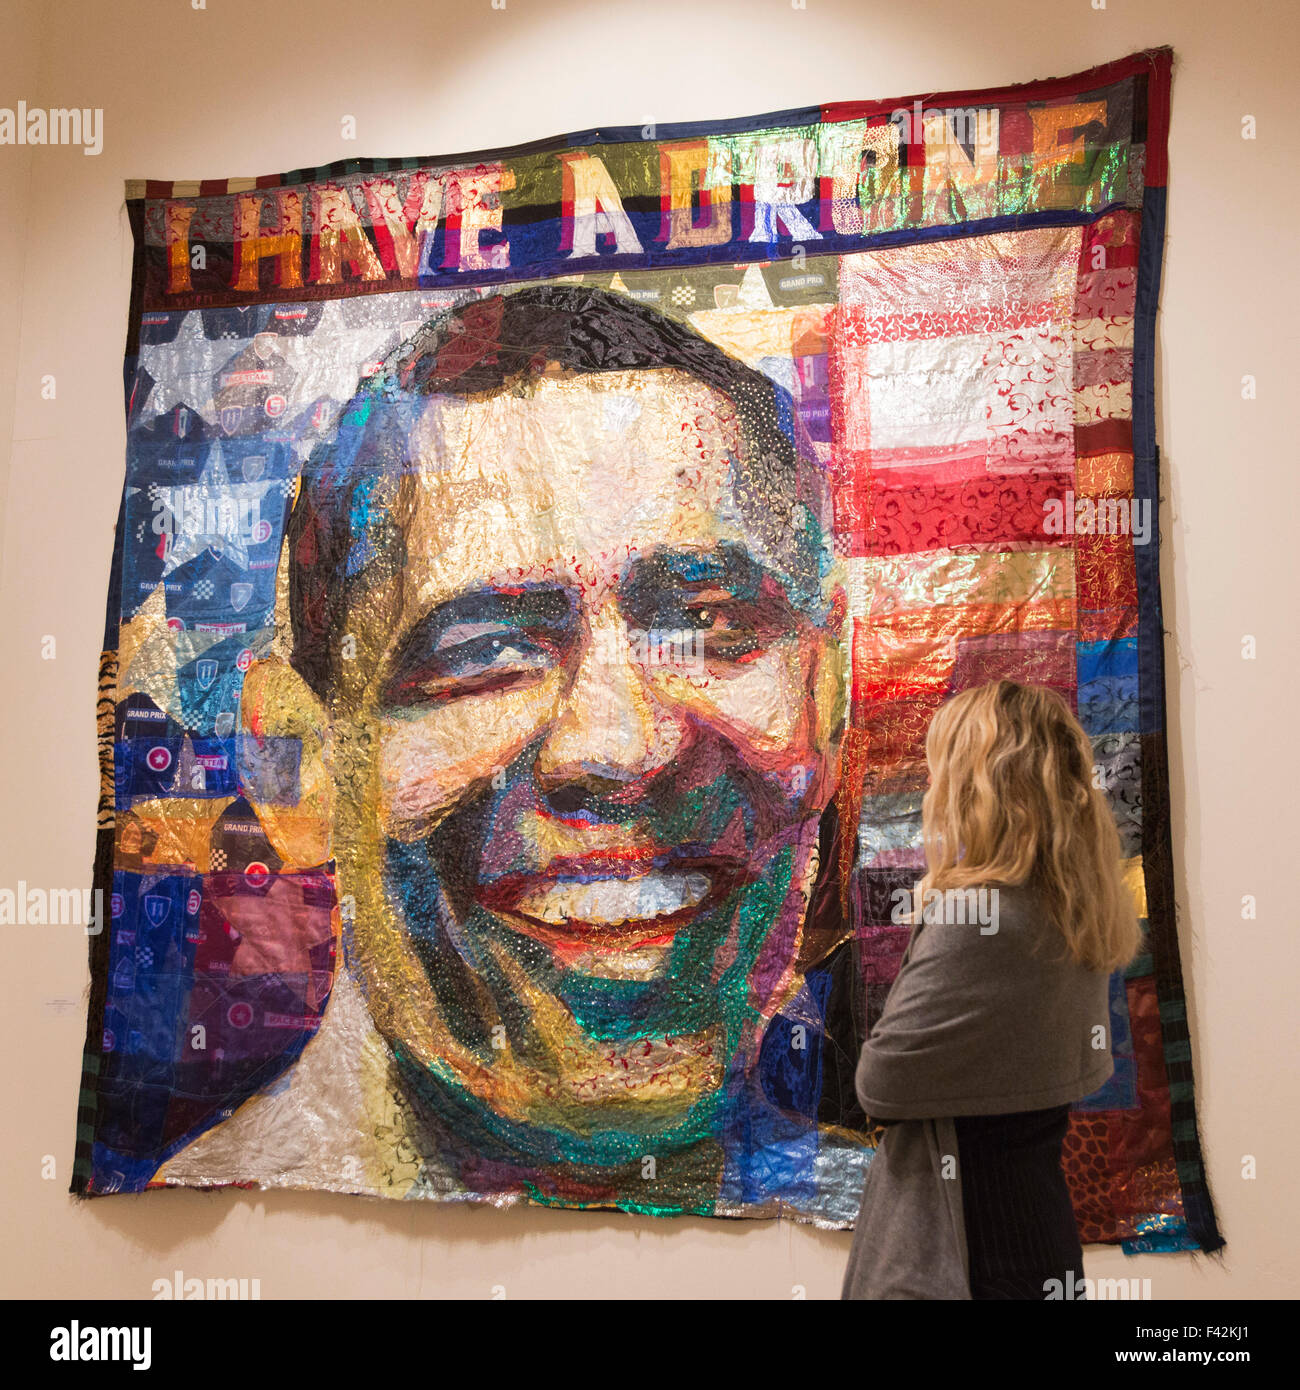 London, UK. 14/10/2015. Pictured: a Barack Obama "I have a drone" artwork by artist Hassan Musa from Sudan. Press preview of the 1:54 Contemporary African Art Fair. The 1:54 Contemporary African Art Fair returns to London from 15-18 October 2015 for the third edition featuring 38 exhibitors, 14 of which are from Africa, and representing more than 150 contemporary artists from Africa and the African diaspora. Stock Photo